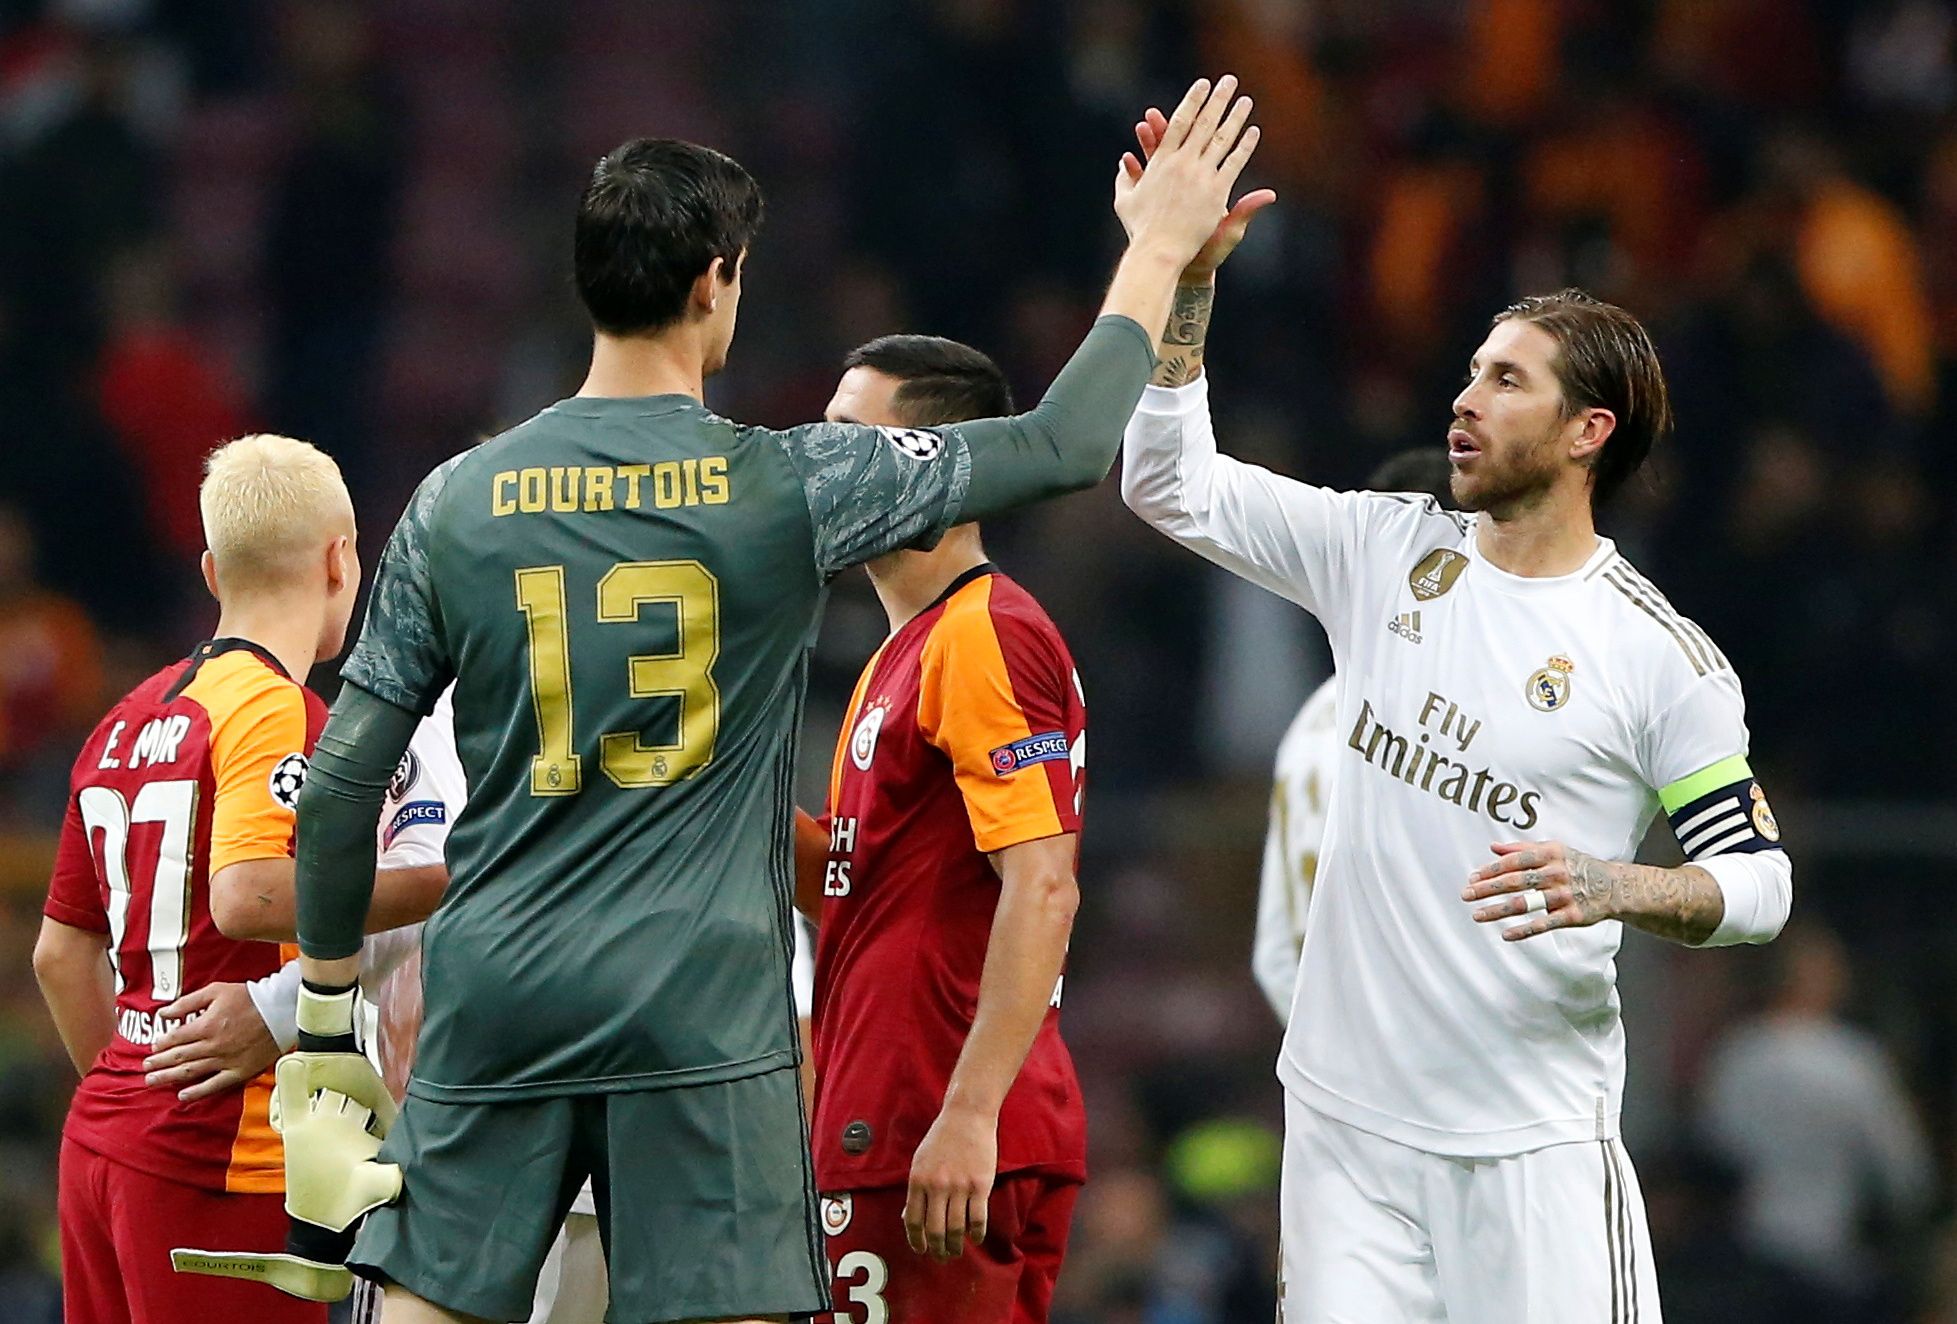 Soccer Football - Champions League - Group A - Galatasaray v Real Madrid - Turk Telekom Stadium, Istanbul, Turkey - October 22, 2019  Real Madrid's Sergio Ramos and Thibaut Courtois after the match  REUTERS/Kemal Aslan